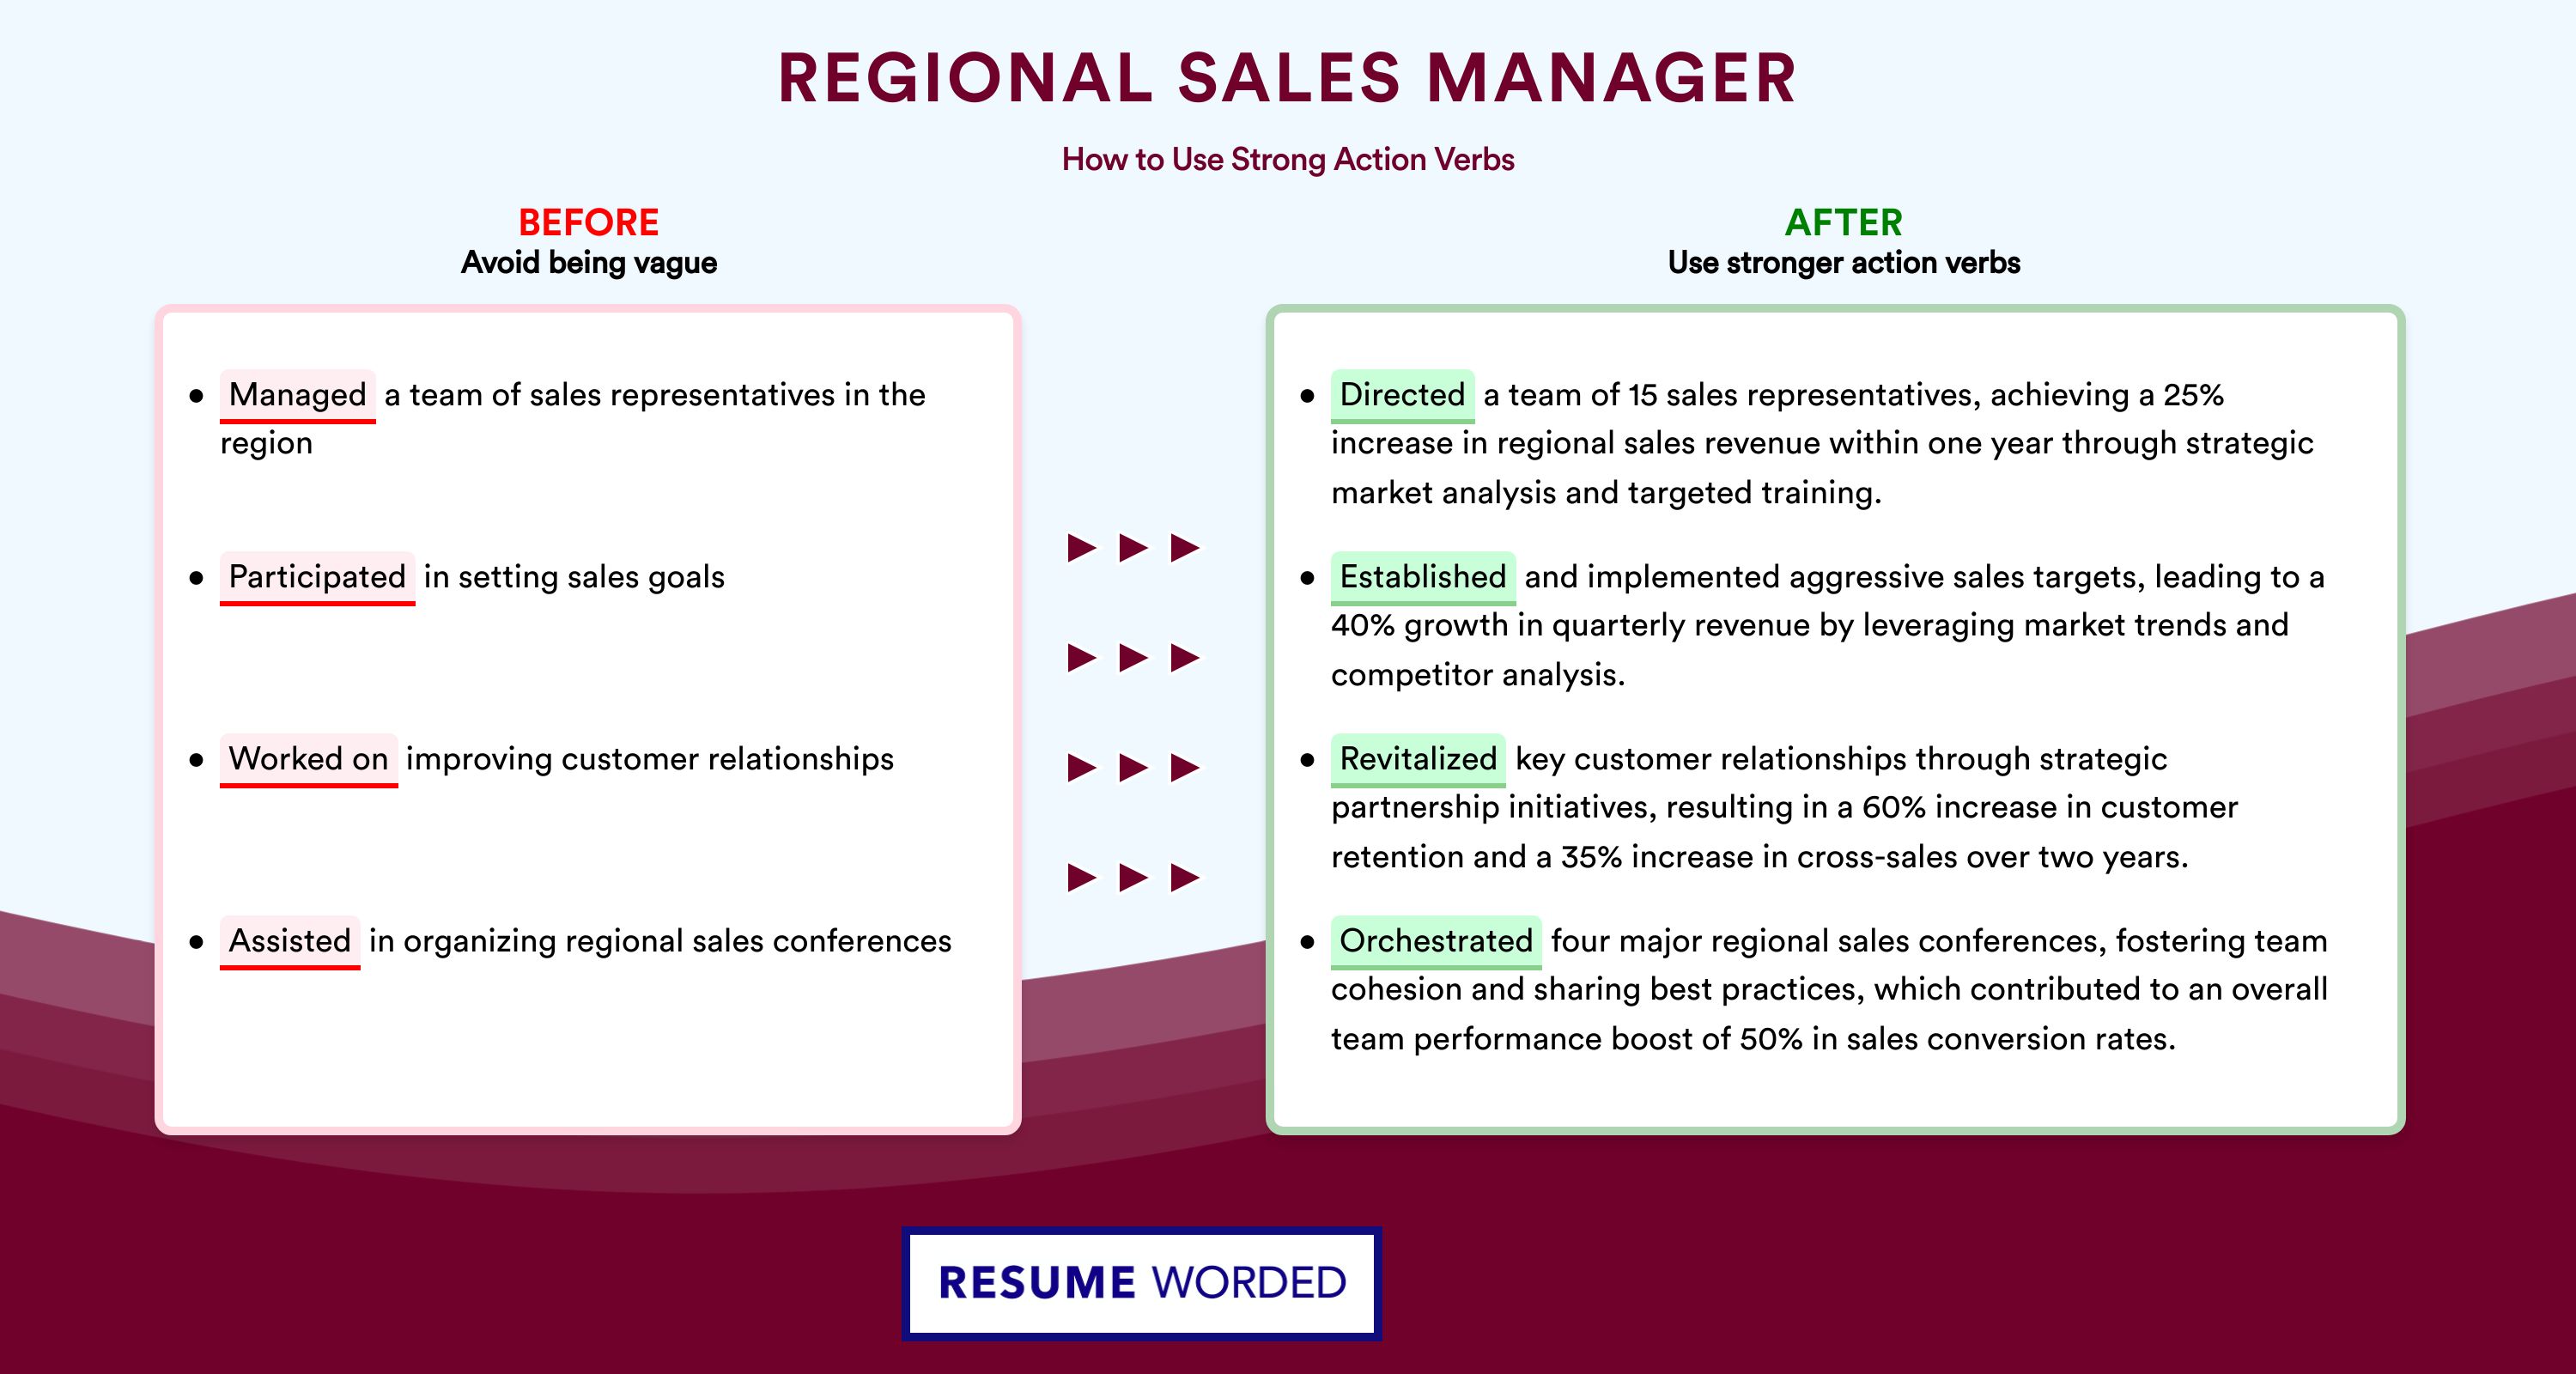 Action Verbs for Regional Sales Manager